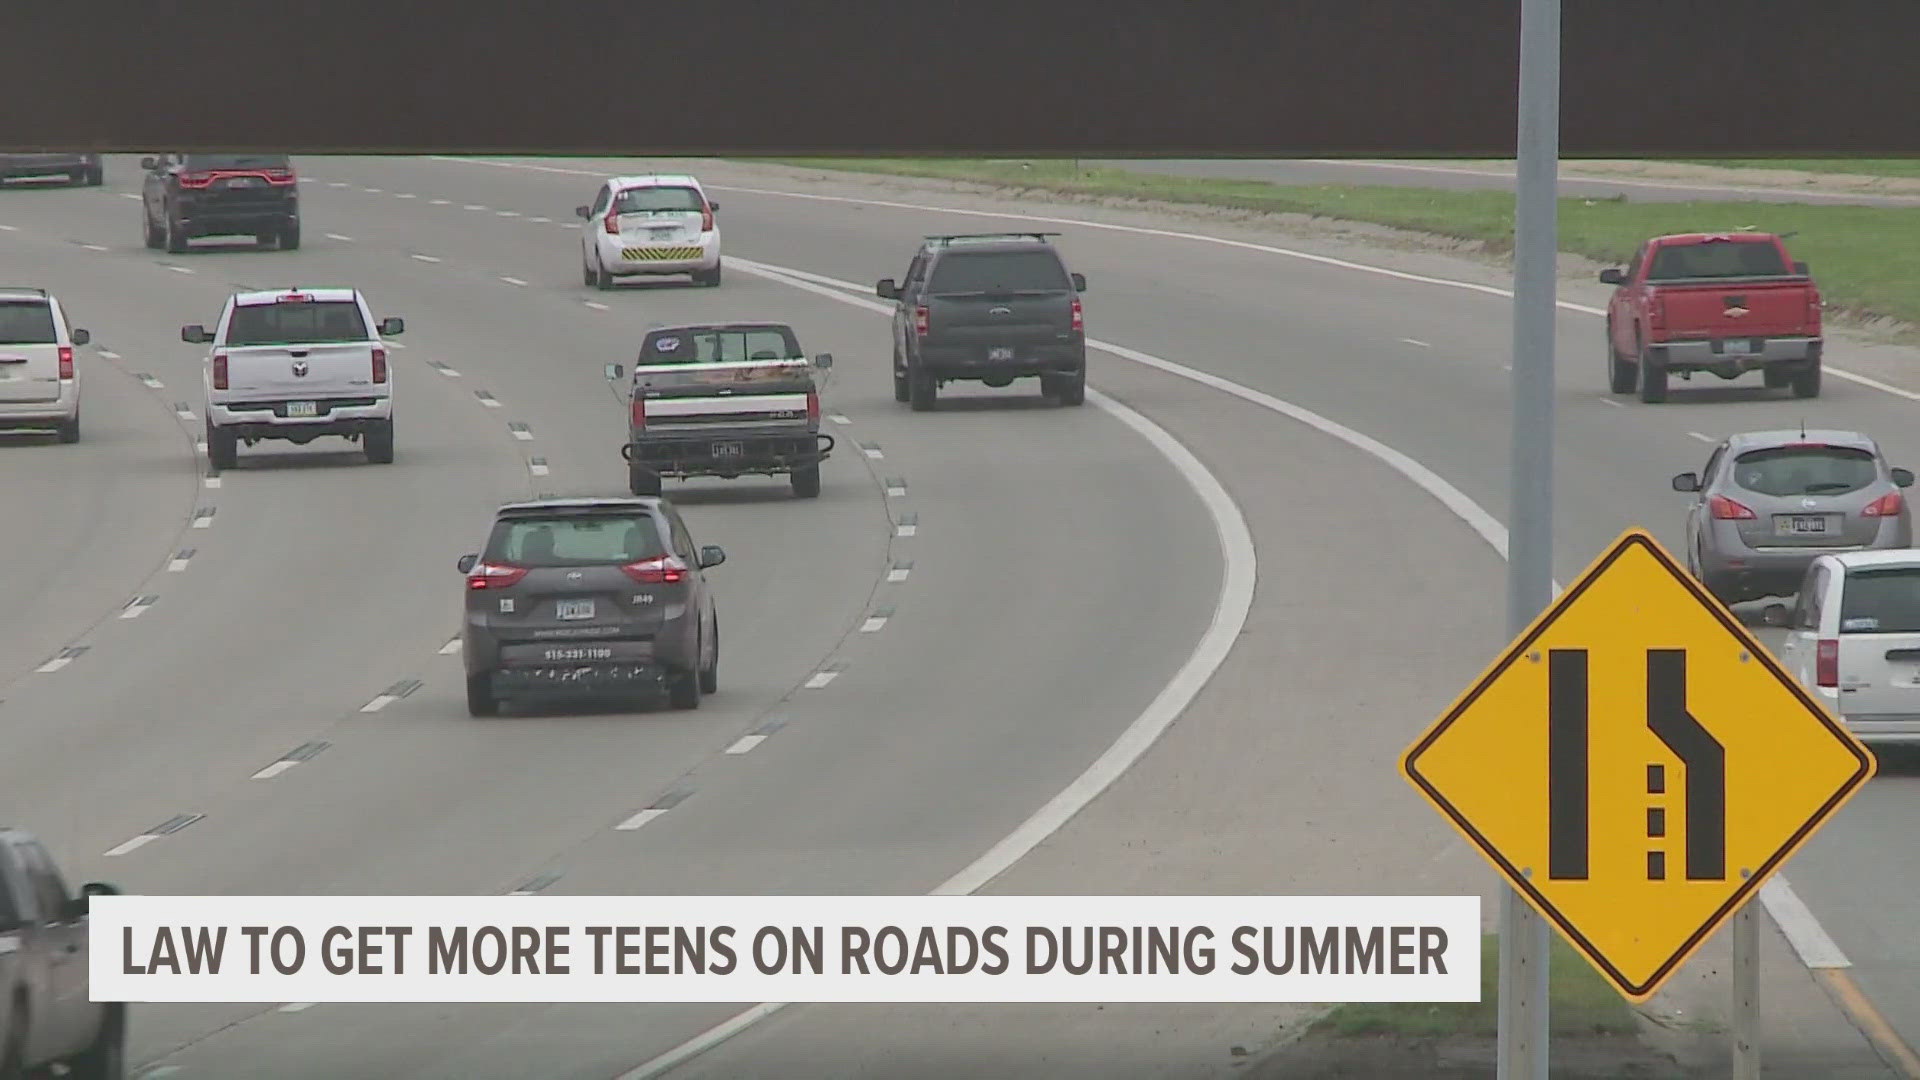 On July 1, a new Iowa law will allow teens as young as 14.5 years of age to drive up to 25 miles for all types of jobs, and to school.